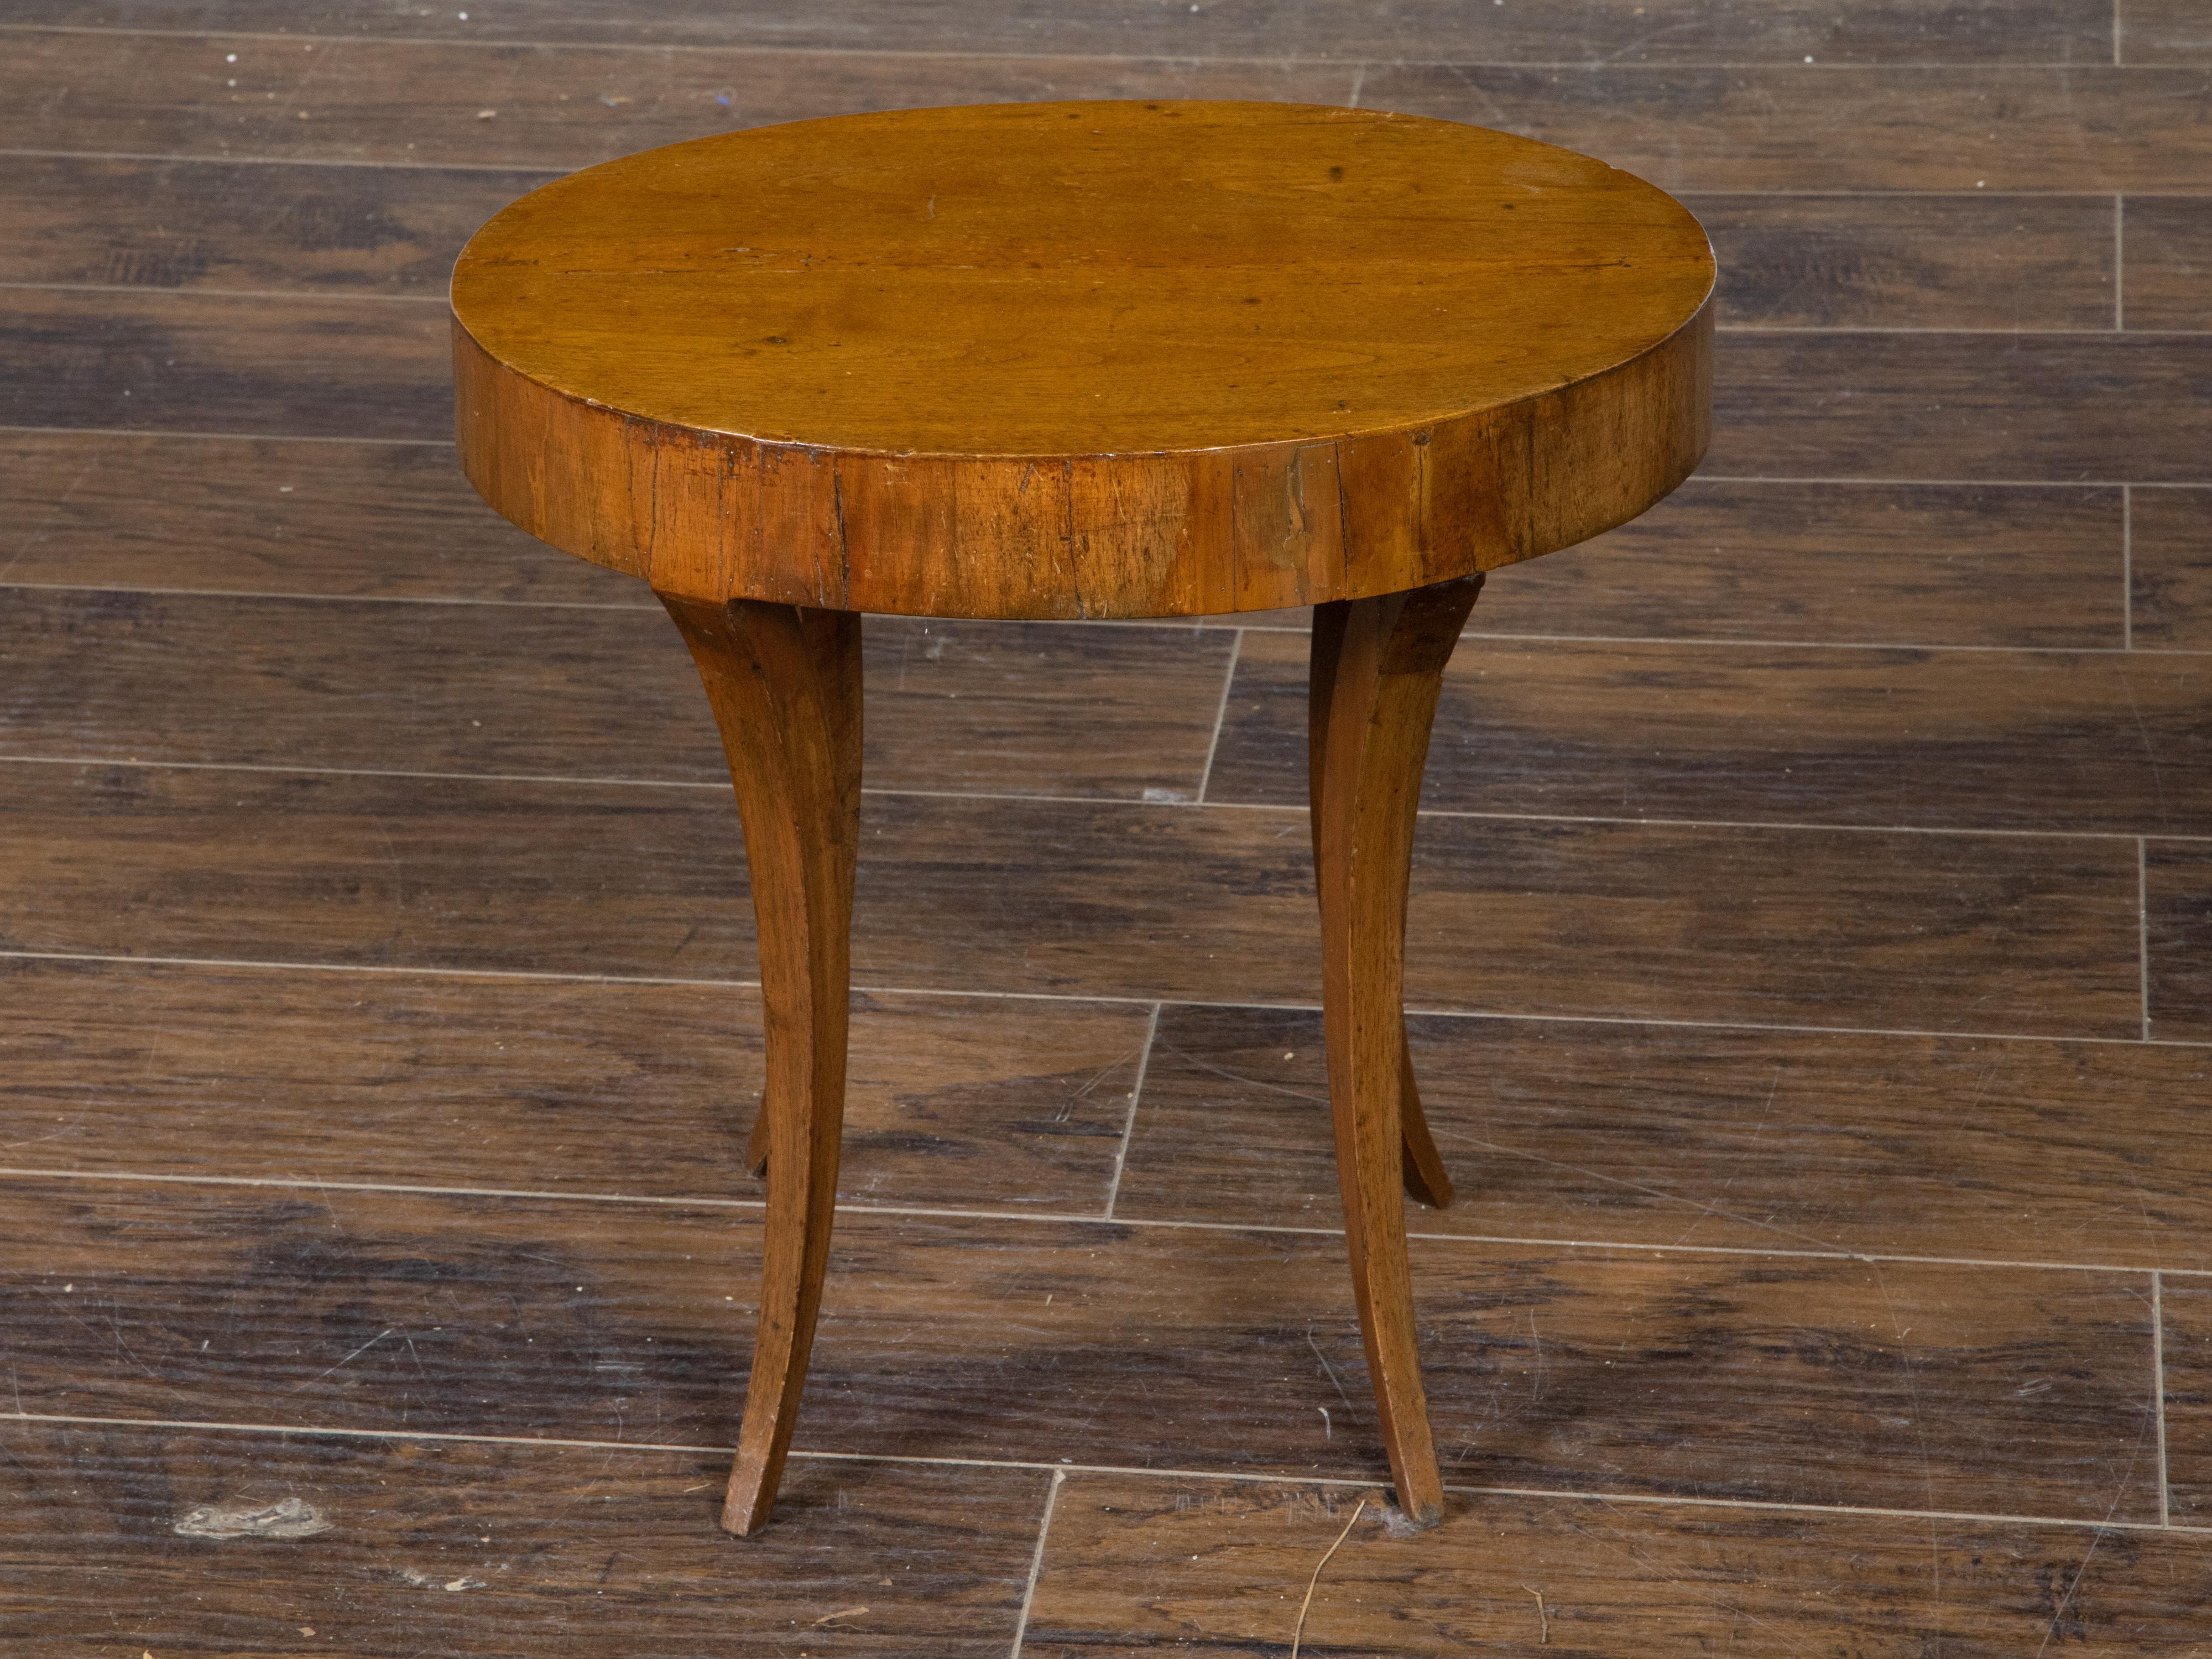 Brass Italian 1810s Neoclassical Walnut Table with Oval Top, Drawer and Saber Legs For Sale